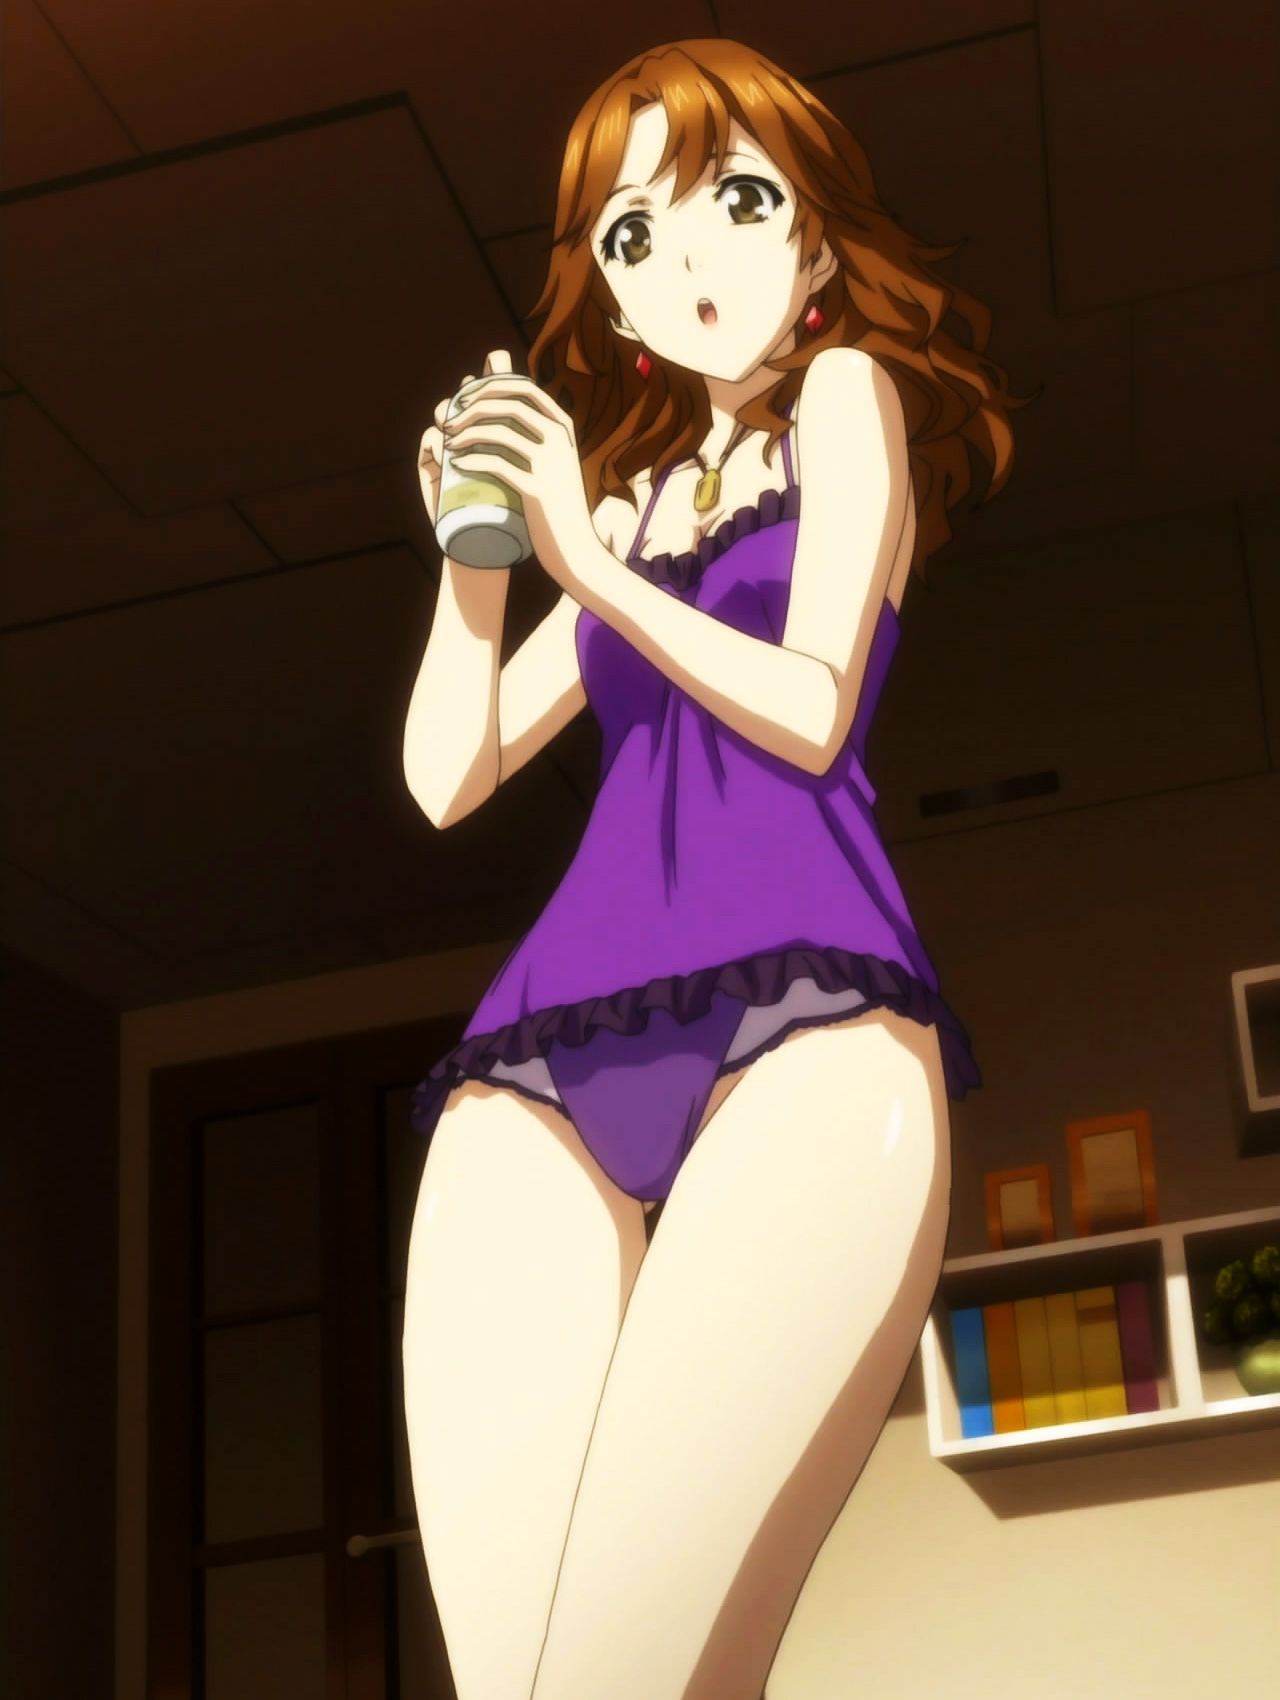 1280px x 1700px - Why doesn't anime have more MILFs? (30 - ) - Forums ...